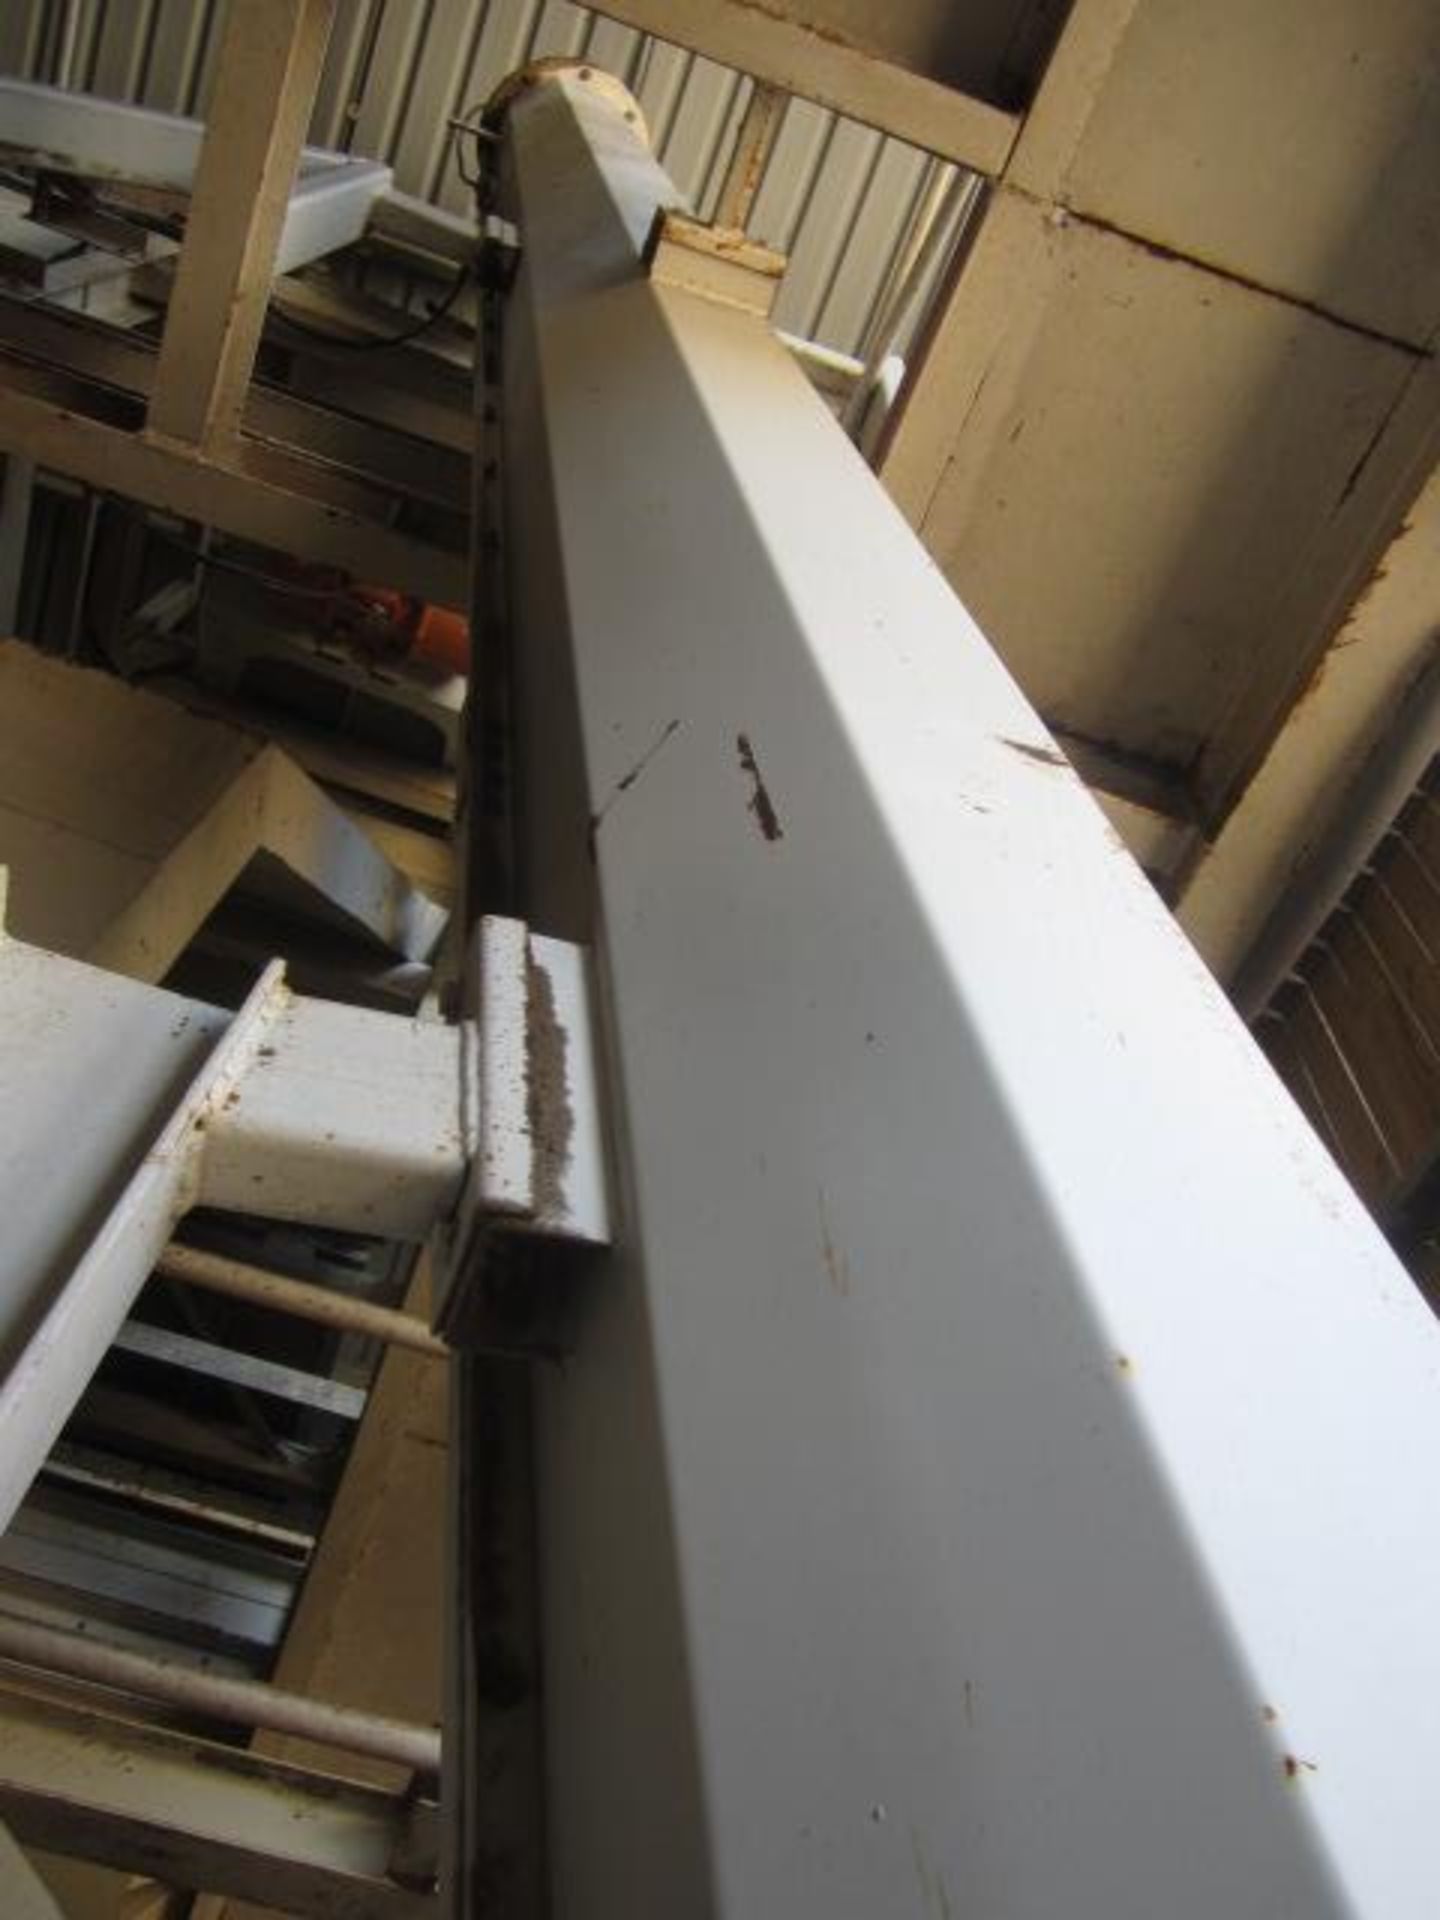 PST V8-420 vertical auger screw conveyor, approx. 9.6m height x 400mm dia, serial no: 1022 U25 ( - Image 2 of 4